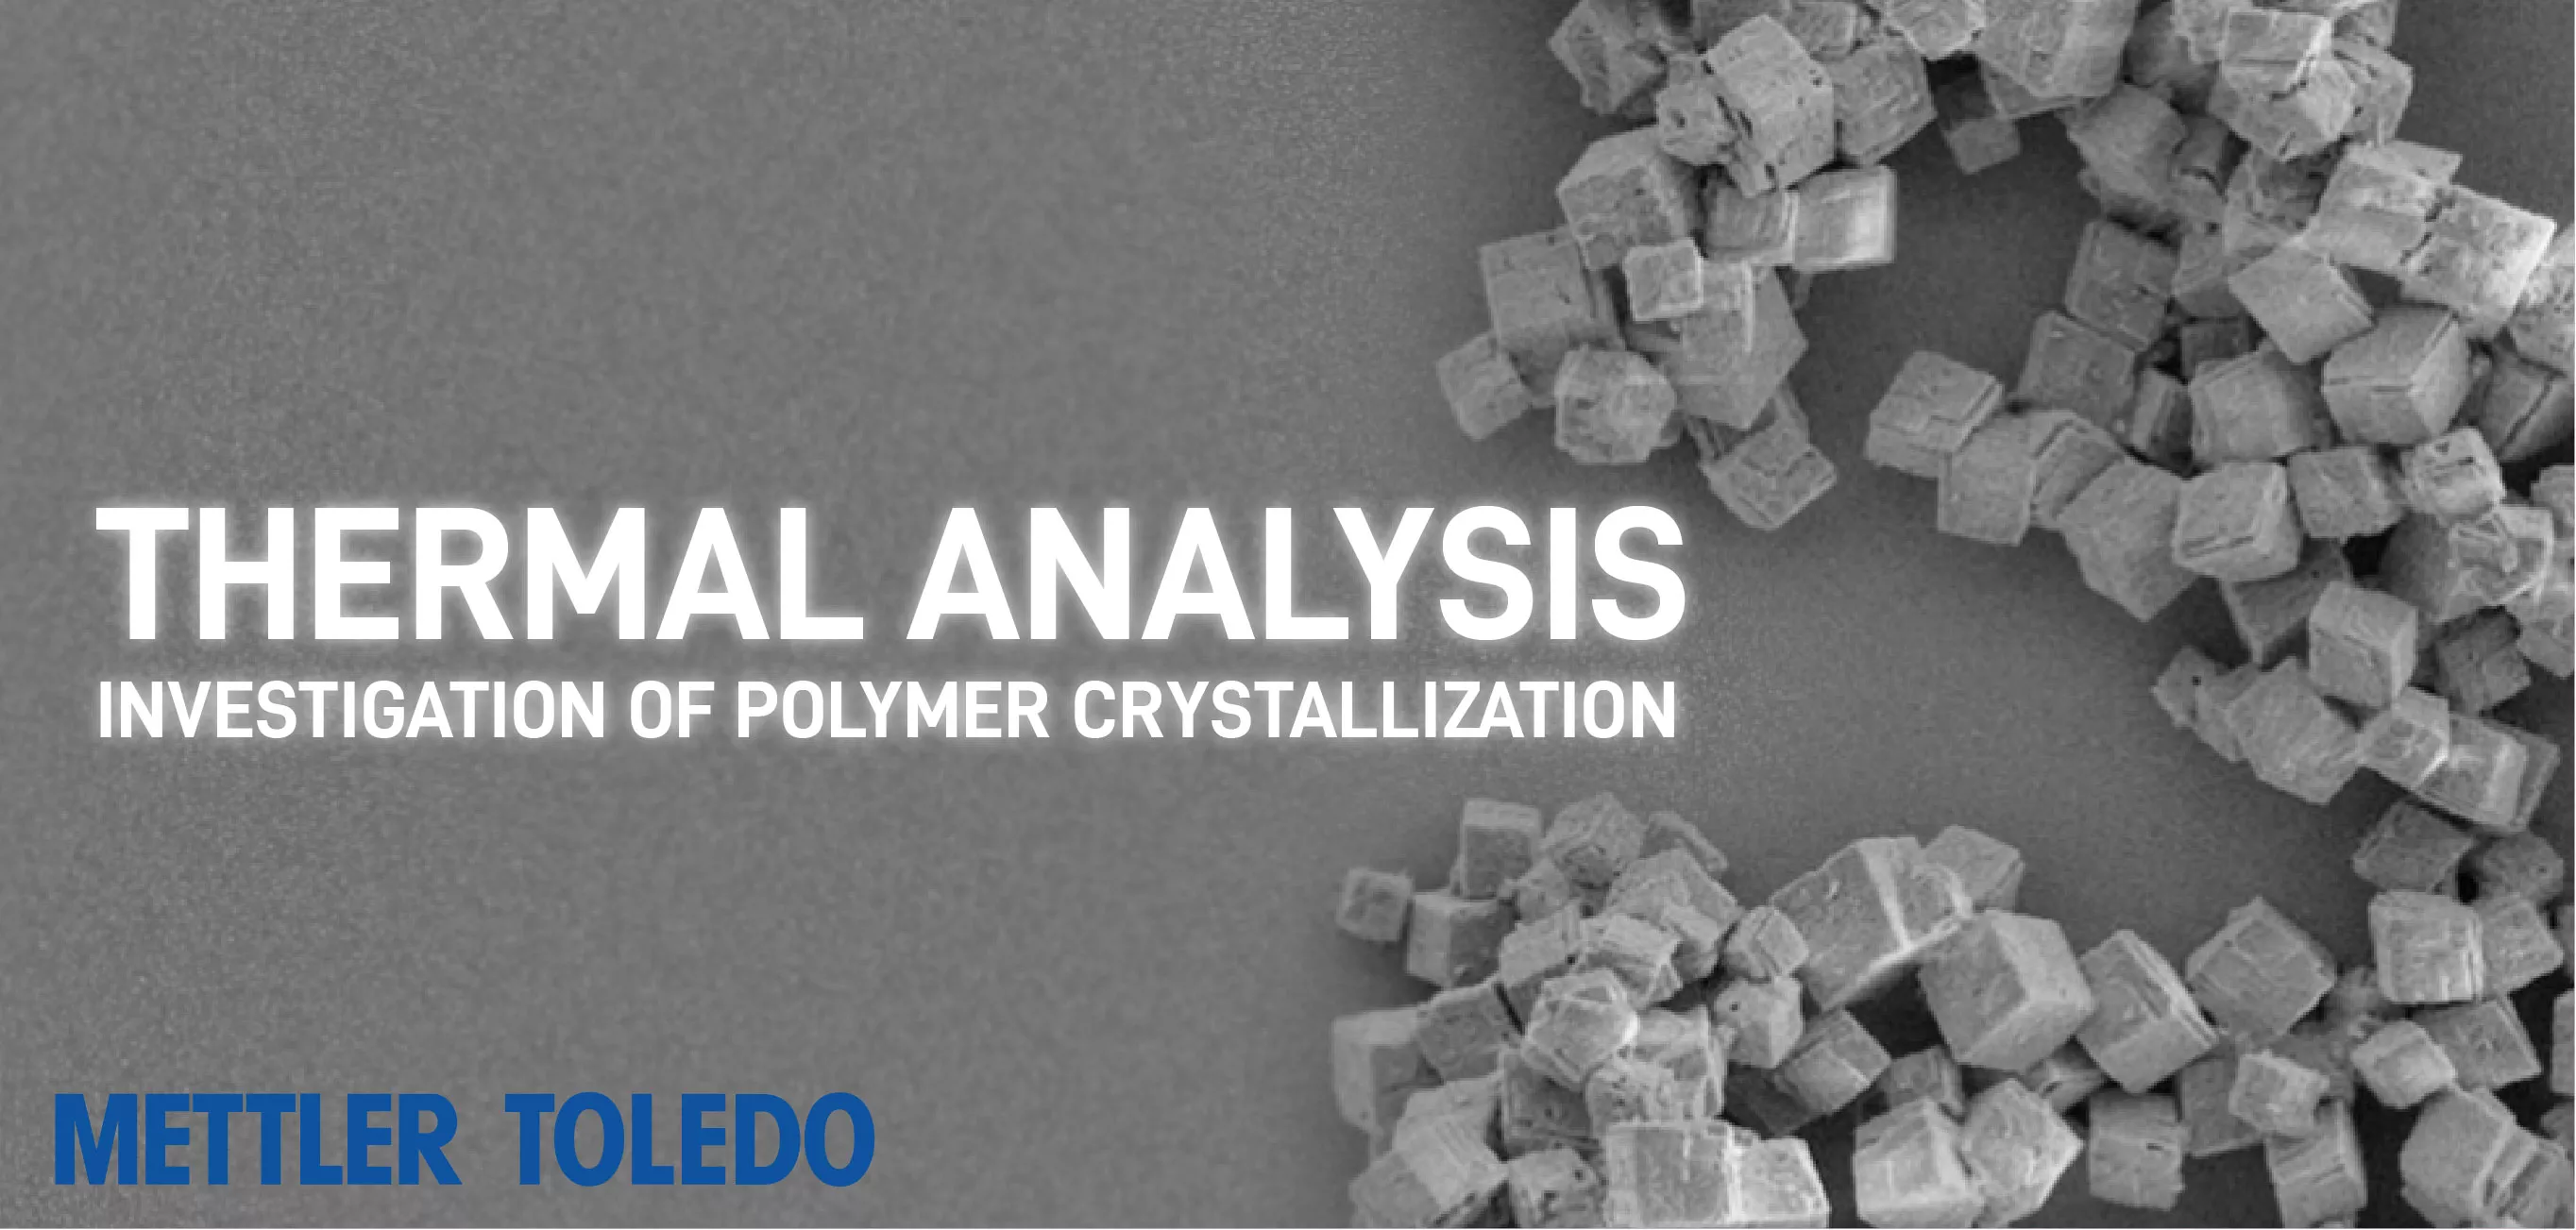 Polymer Crystallization Investigated by Thermal Analysis by METTLER TOLEDO Webinar